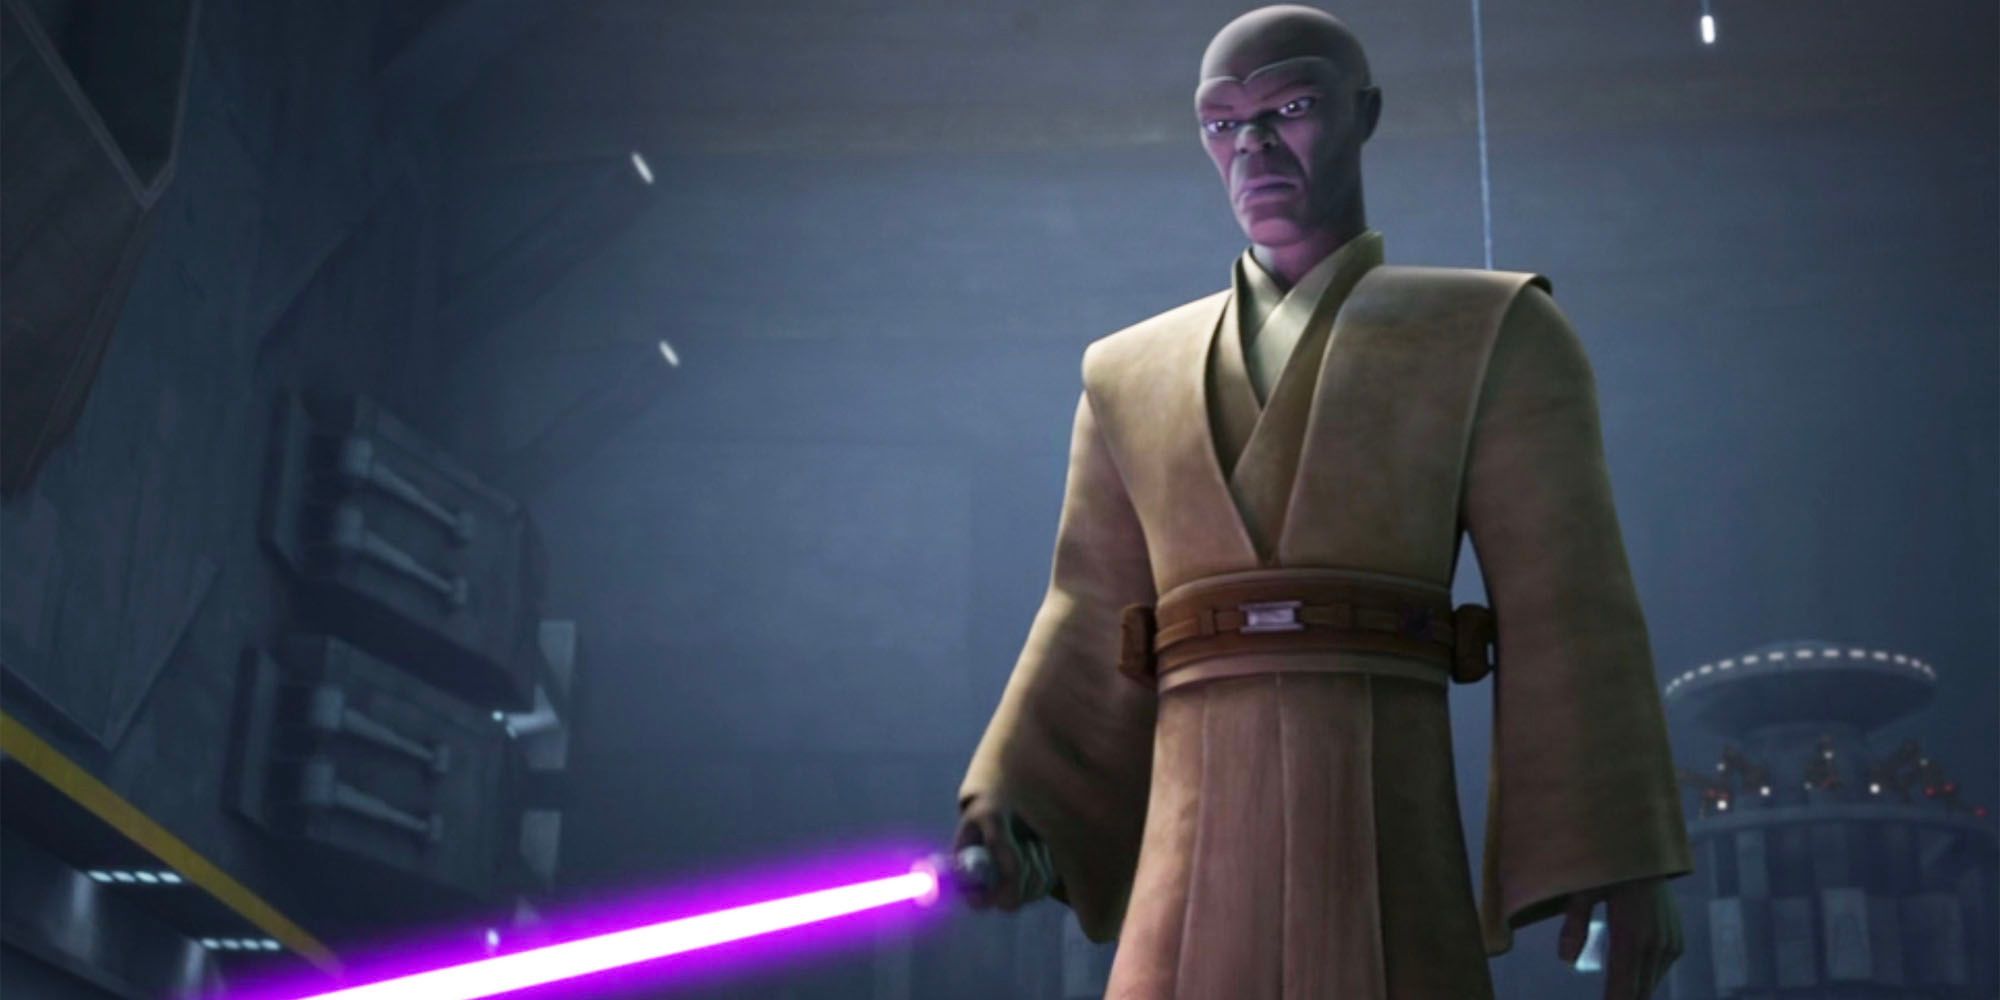 Mace Windu offers the droids a chance to stand down before he kills them in Star Wars the Clone Wars.